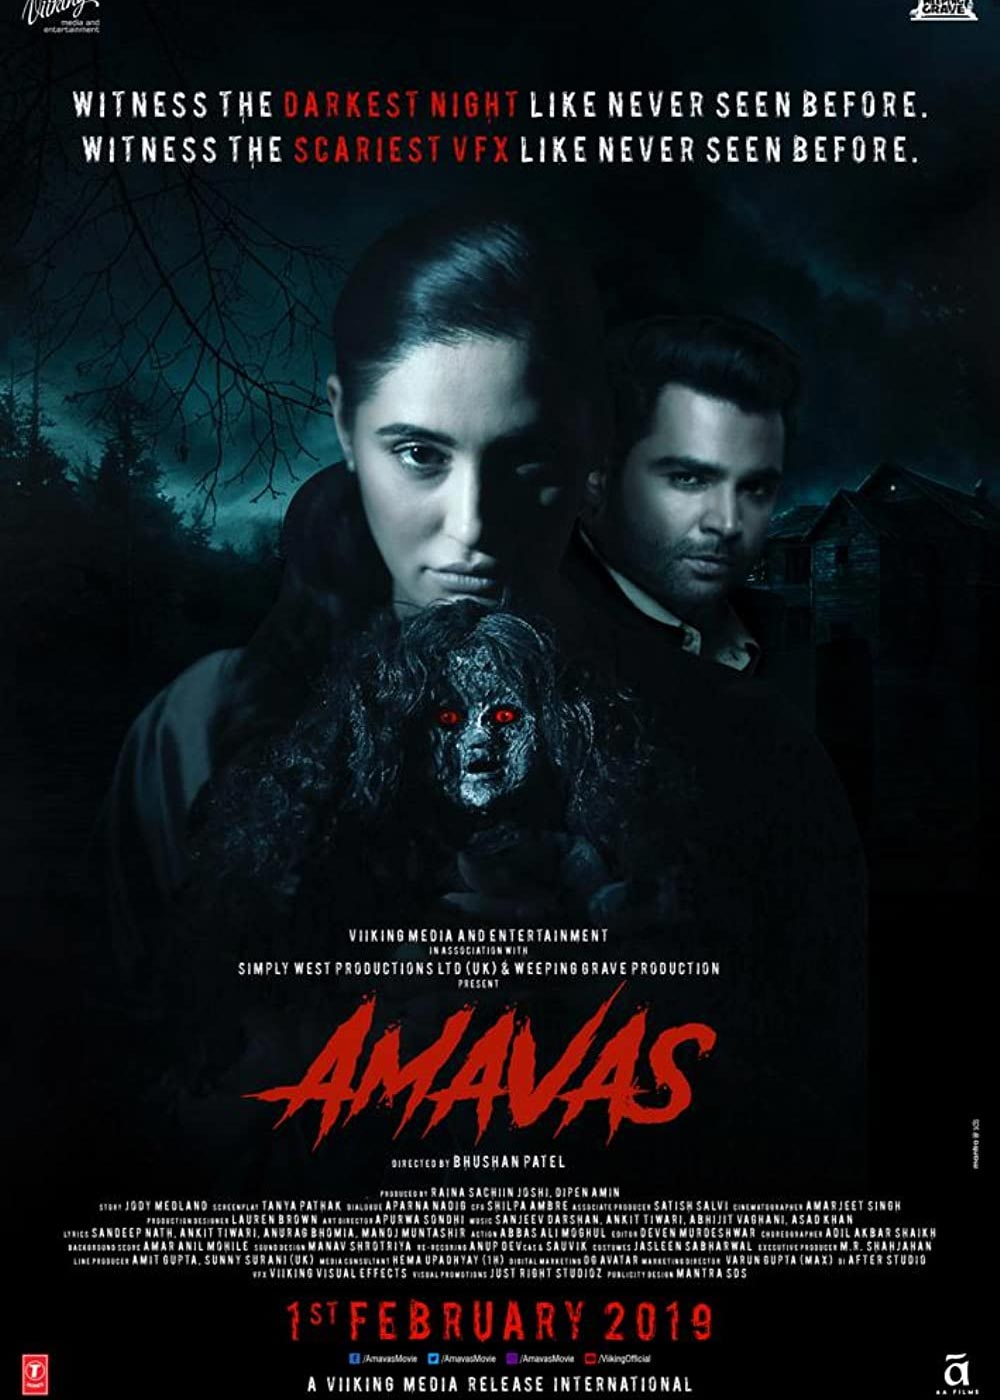 Watch Amavas Full movie Online In HD | Find where to watch it online on  Justdial UK